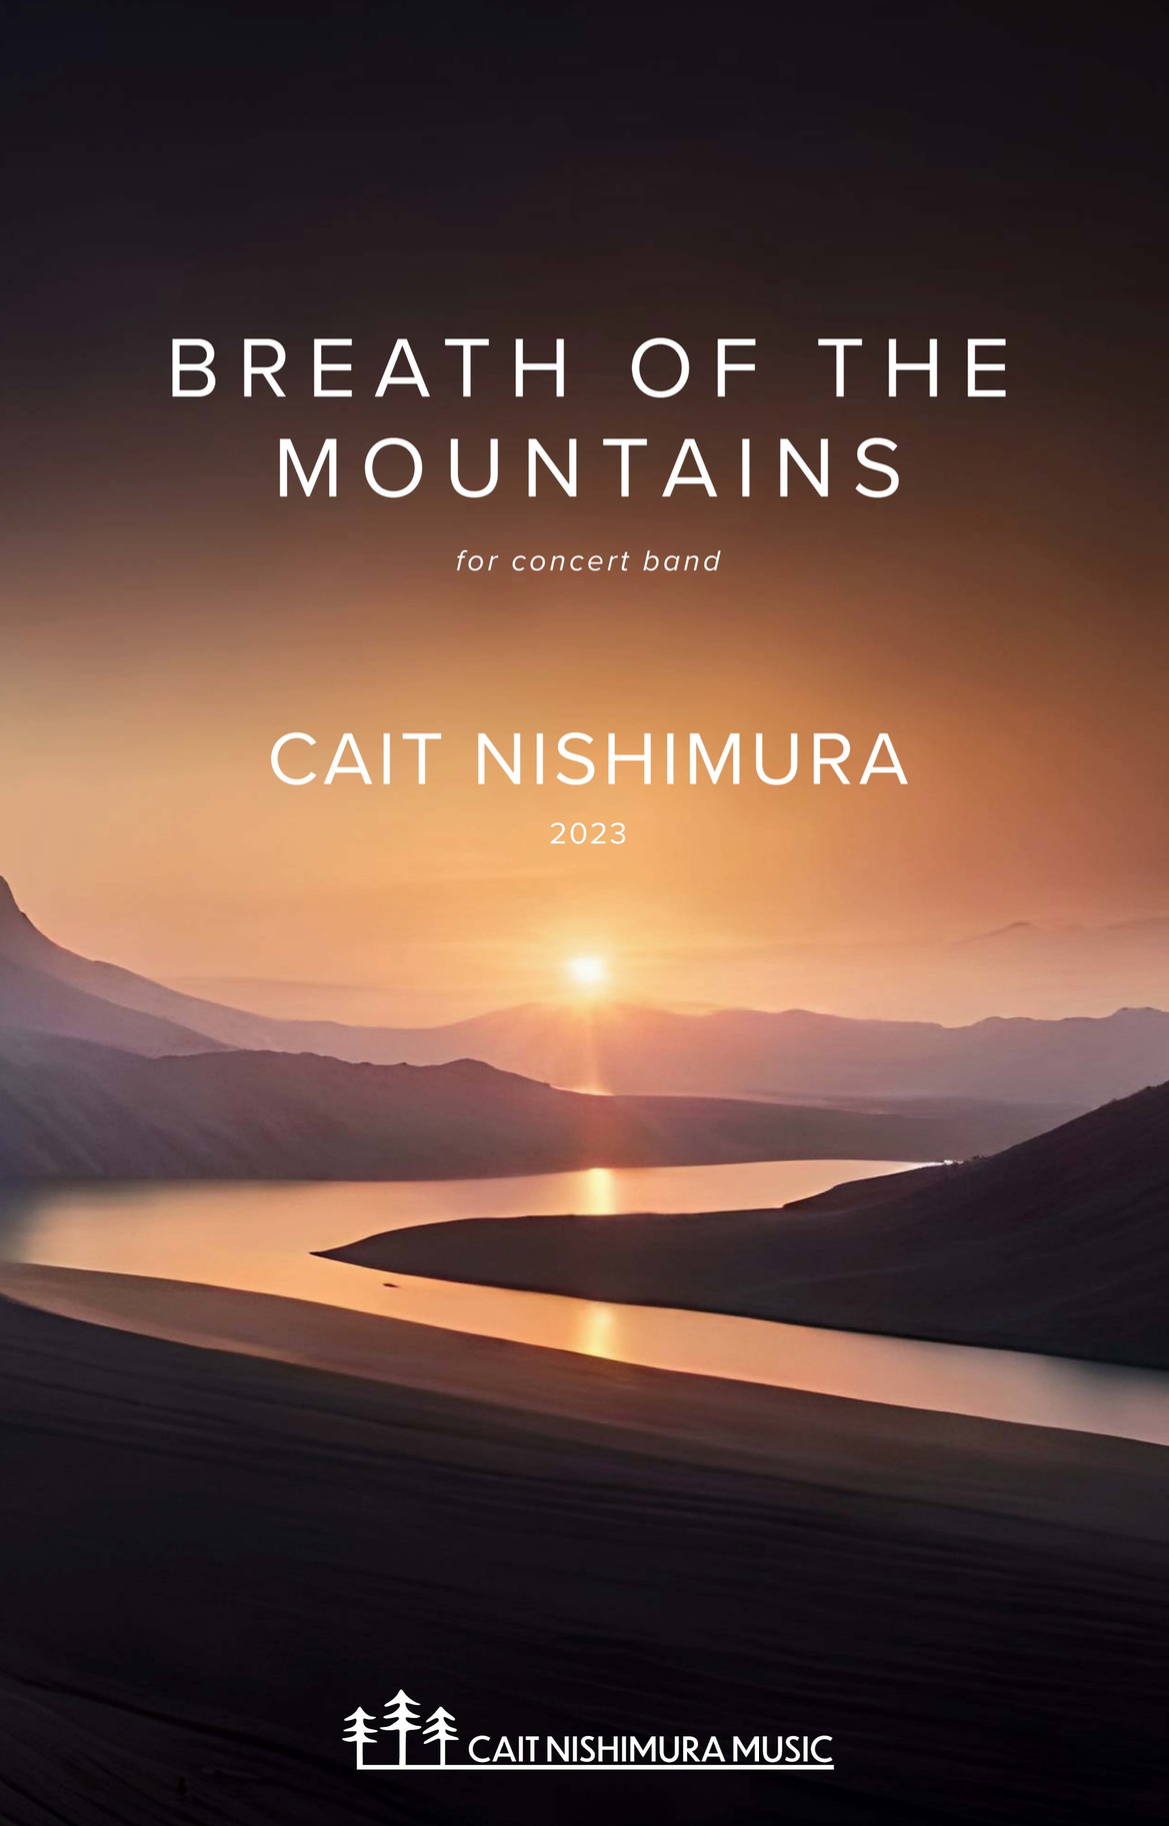 Breath Of The Mountains by Cait Nishimura